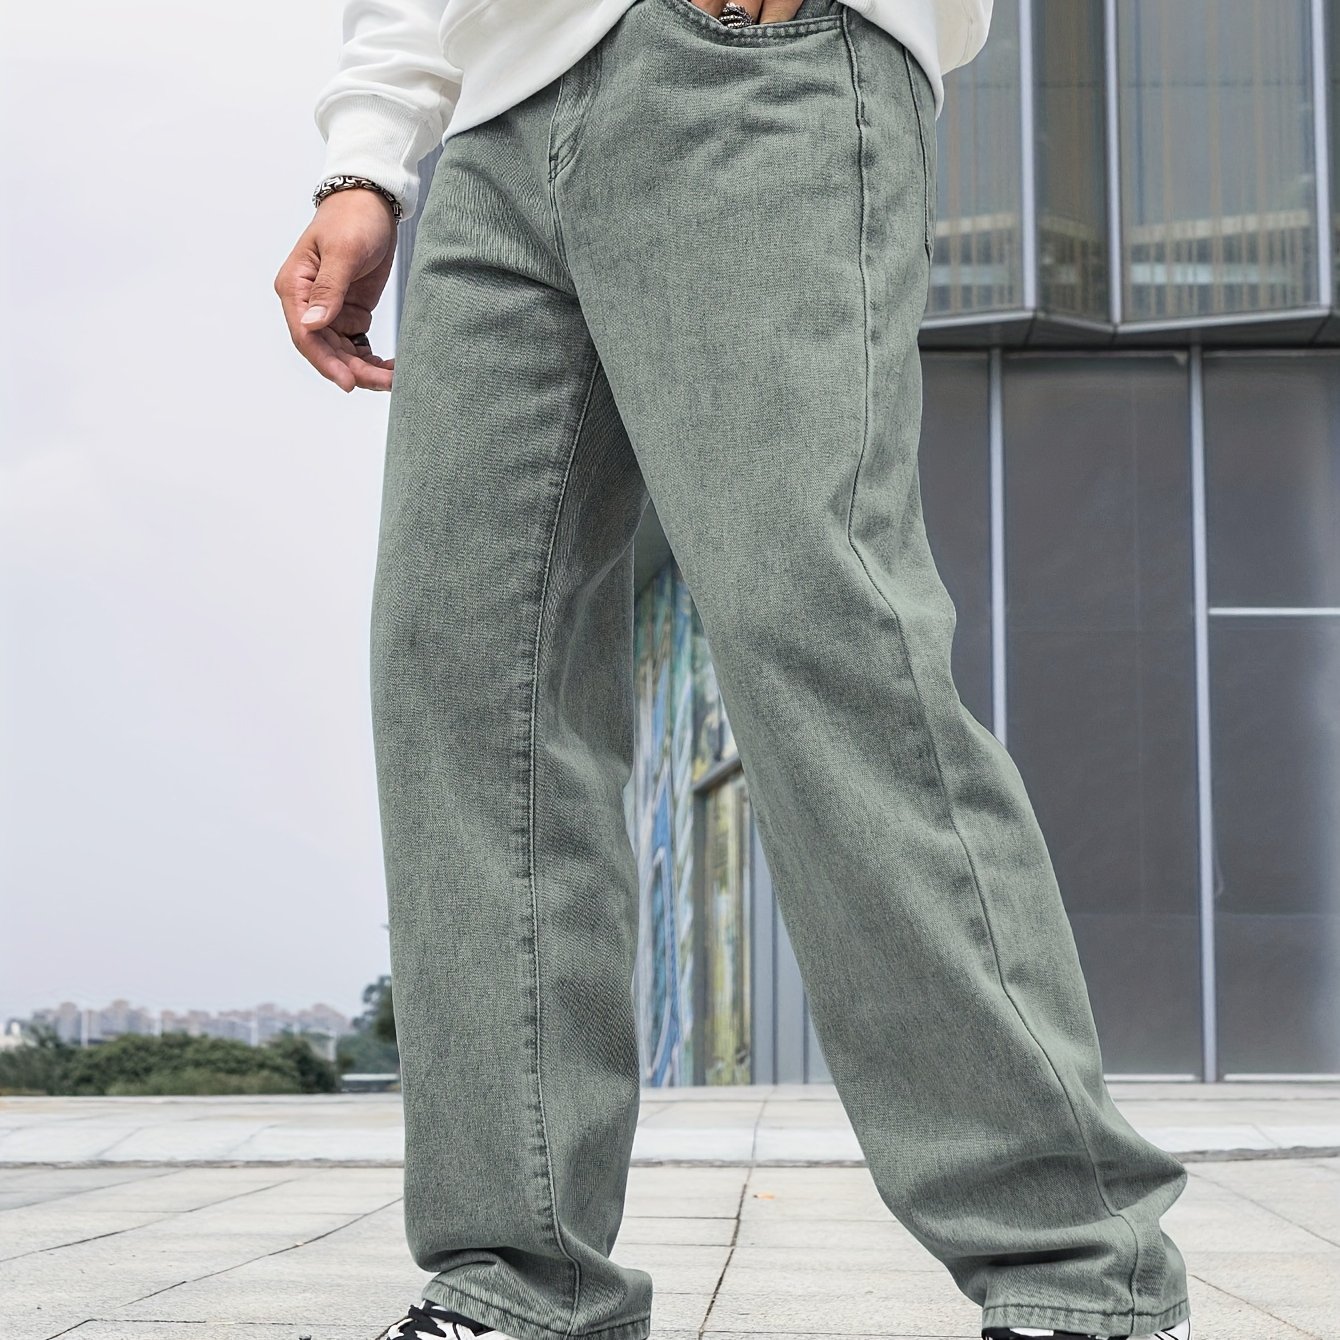 YUHAOTIN Wide Leg Jeans Mens Autumn Winter Casual Pant Sports Pants with  Pocket Fashion Long Pants Jeans 